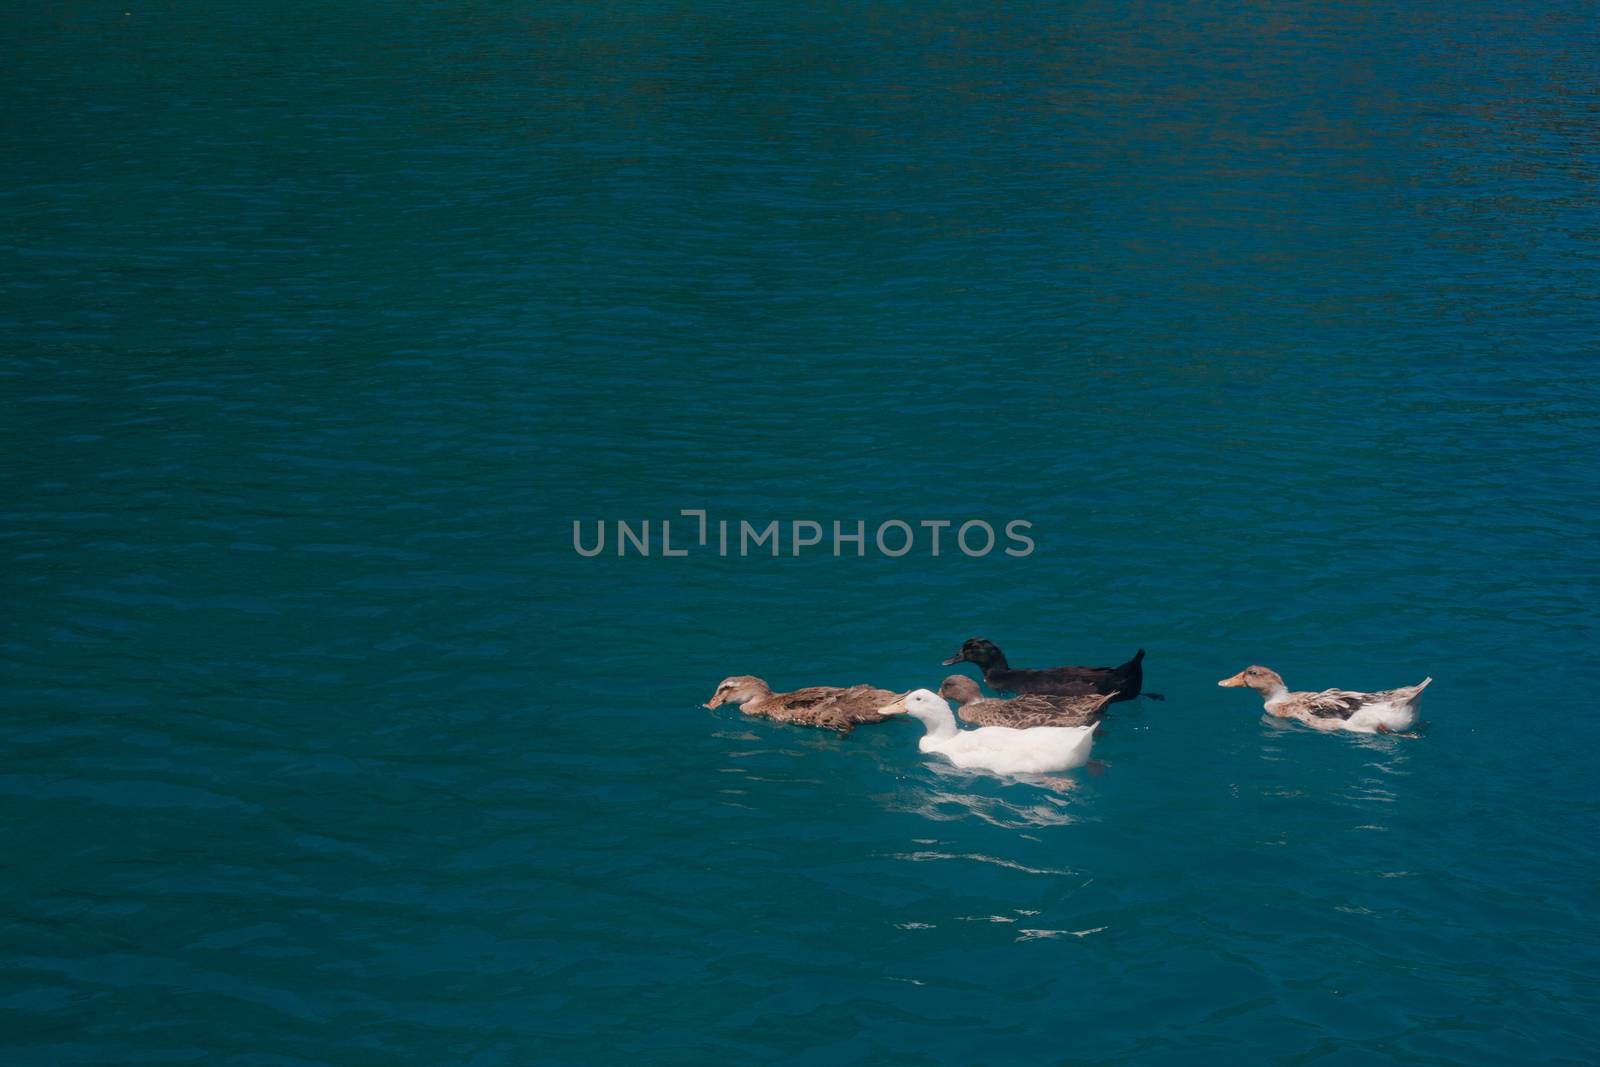 Several ducks floating in blue water
